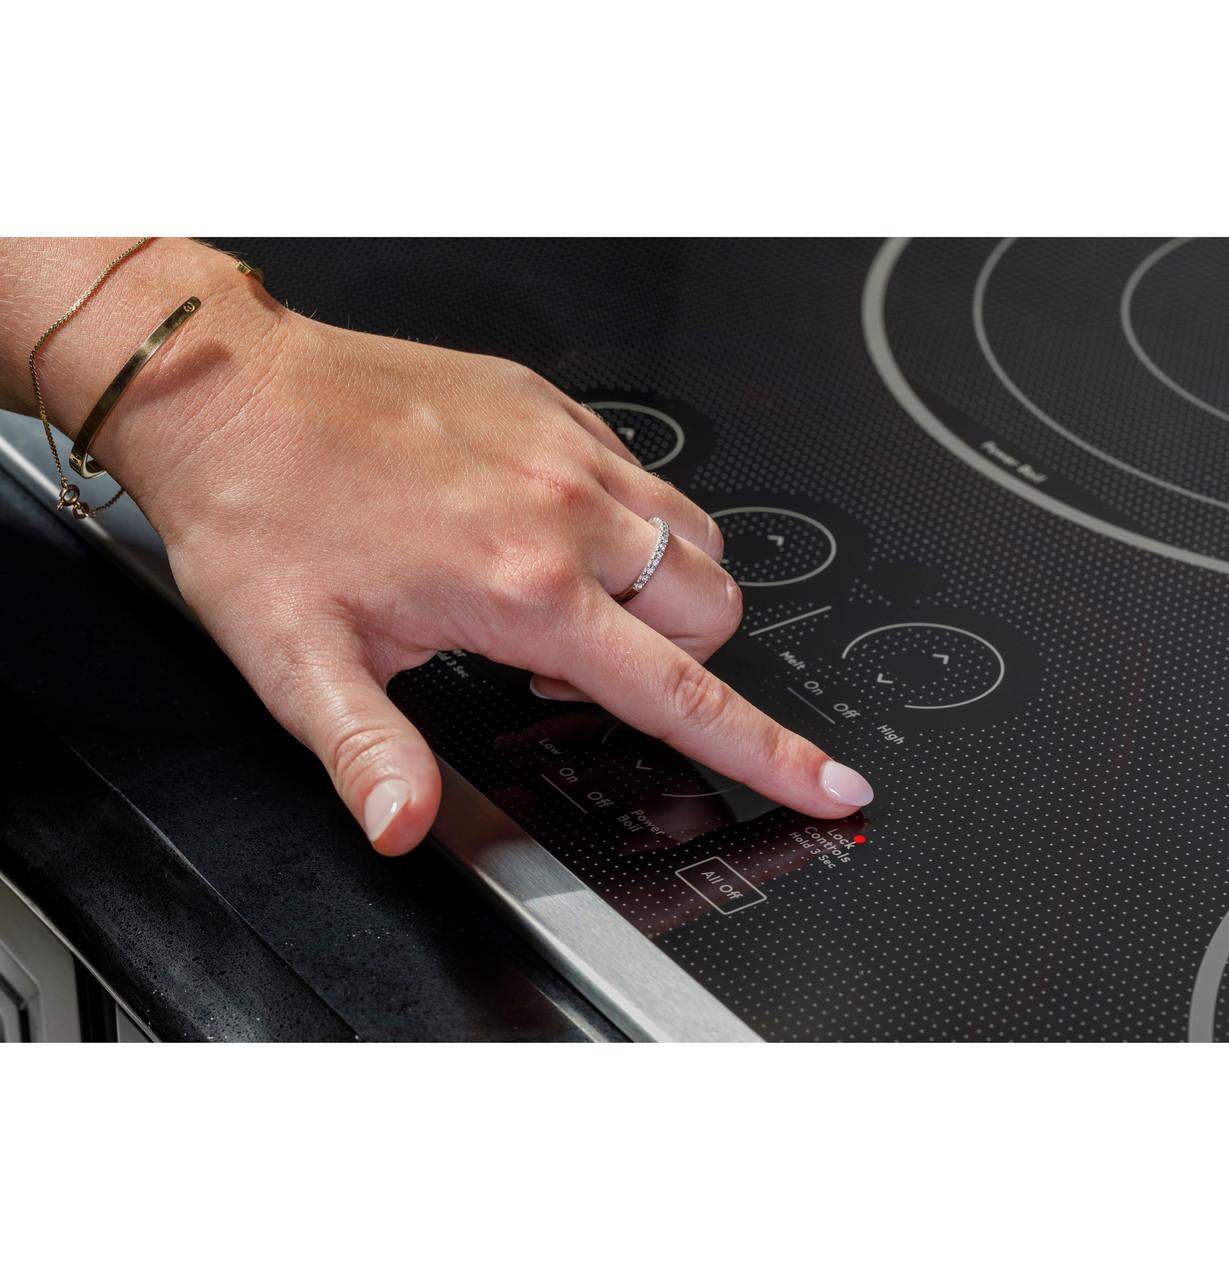 Cafe Caf(eback)™ 30" Touch-Control Electric Cooktop